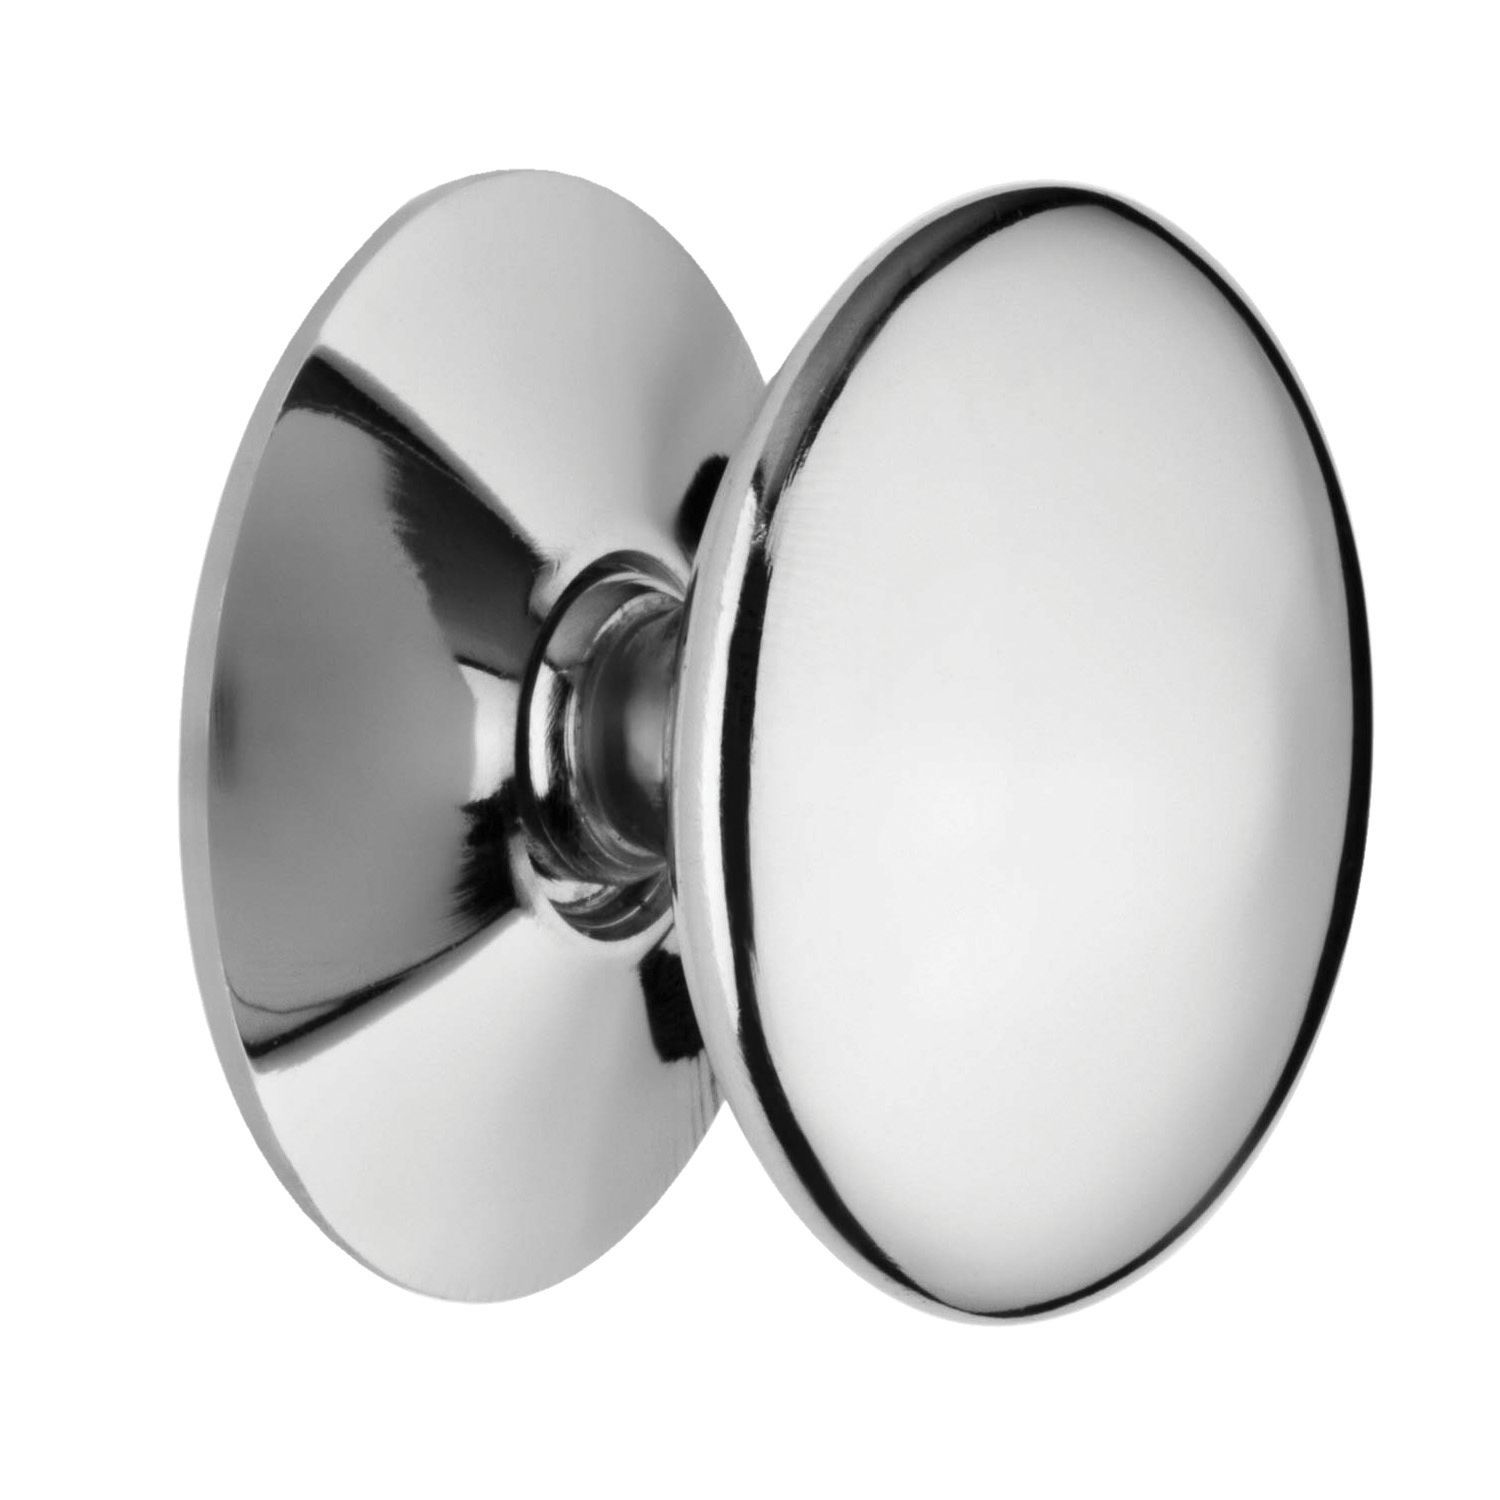 Image of Wickes Victorian Cabinet Door Knob - Chrome 30mm Pack of 4